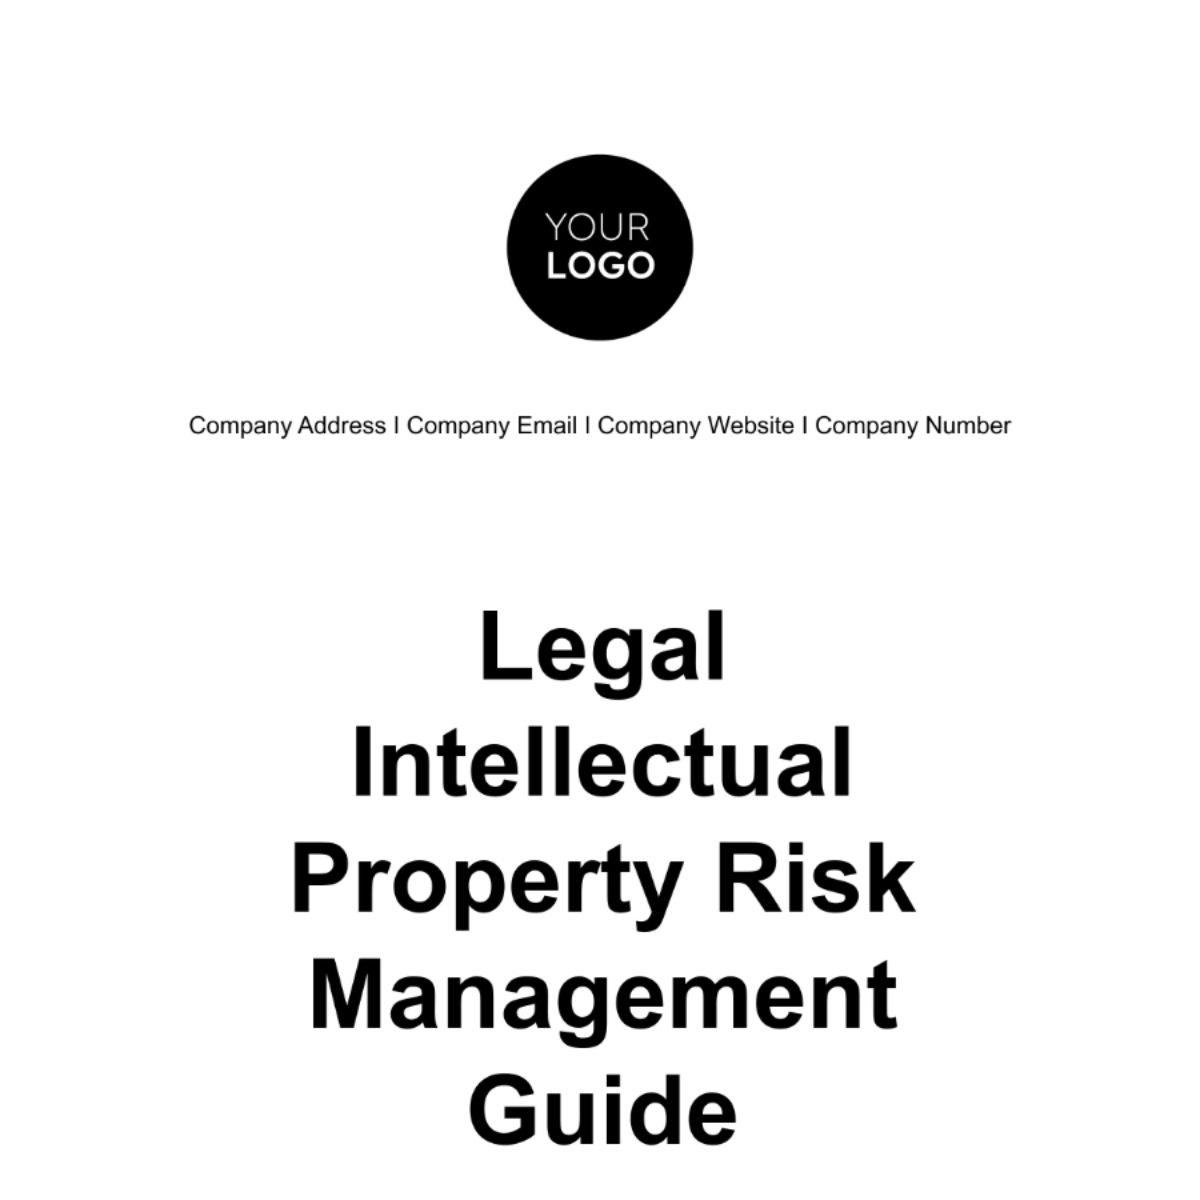 Legal Intellectual Property Risk Management Guide Template